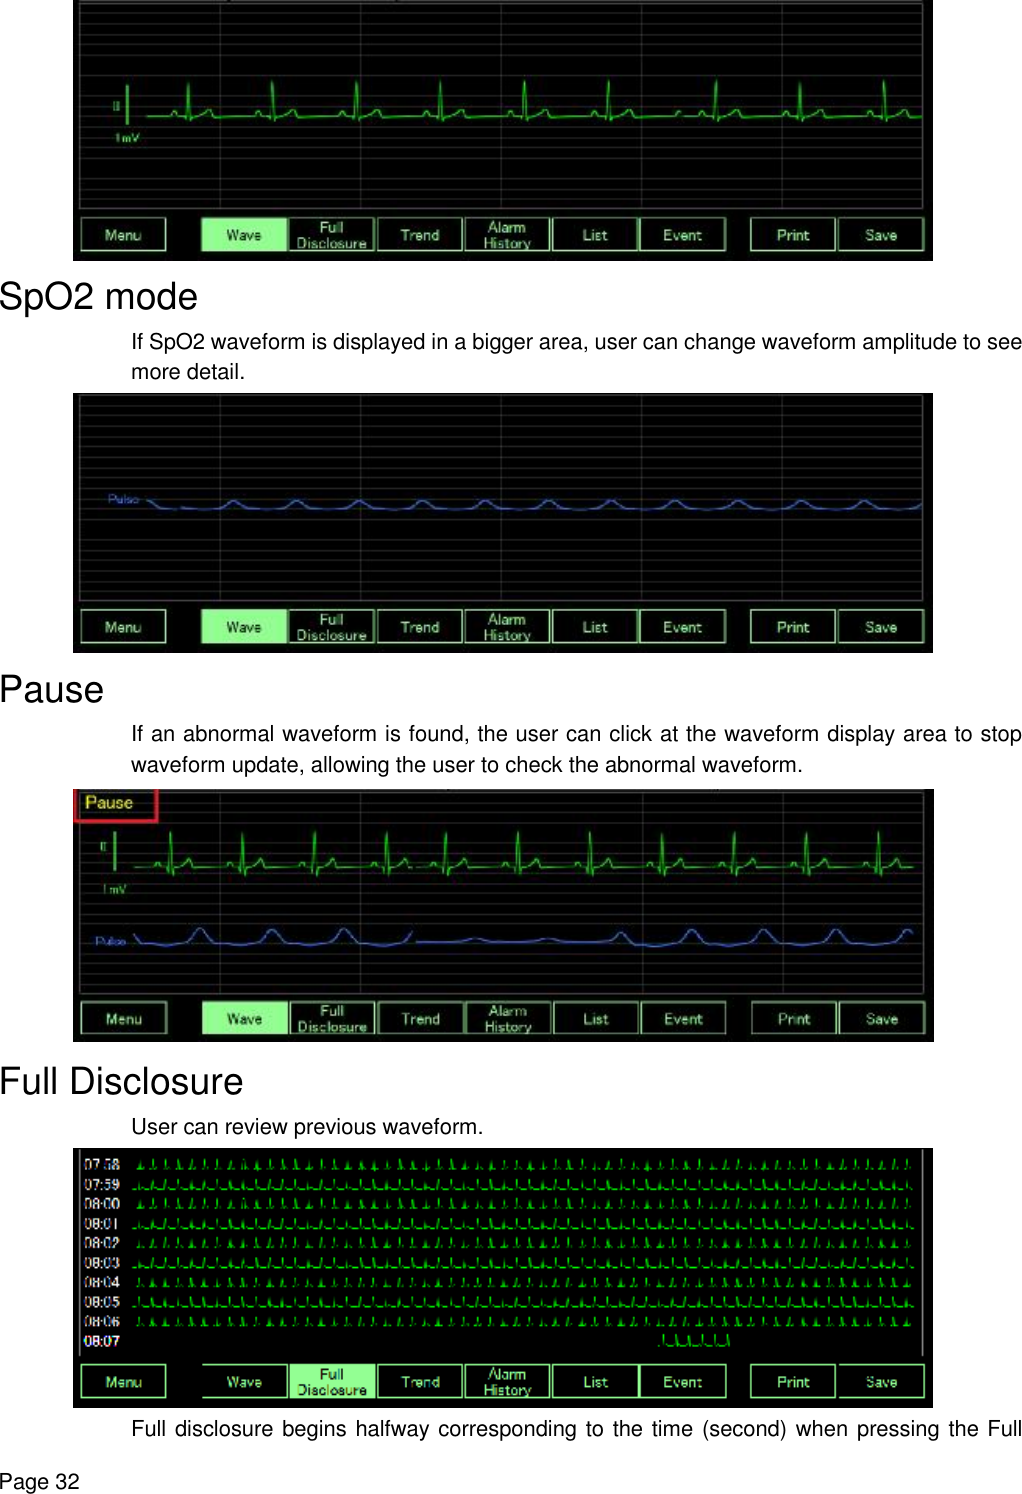    Page 32  SpO2 mode  If SpO2 waveform is displayed in a bigger area, user can change waveform amplitude to see more detail.  Pause If an abnormal waveform is found, the user can click at the waveform display area to stop waveform update, allowing the user to check the abnormal waveform.  Full Disclosure User can review previous waveform.  Full disclosure begins halfway corresponding to the time (second) when pressing the Full 